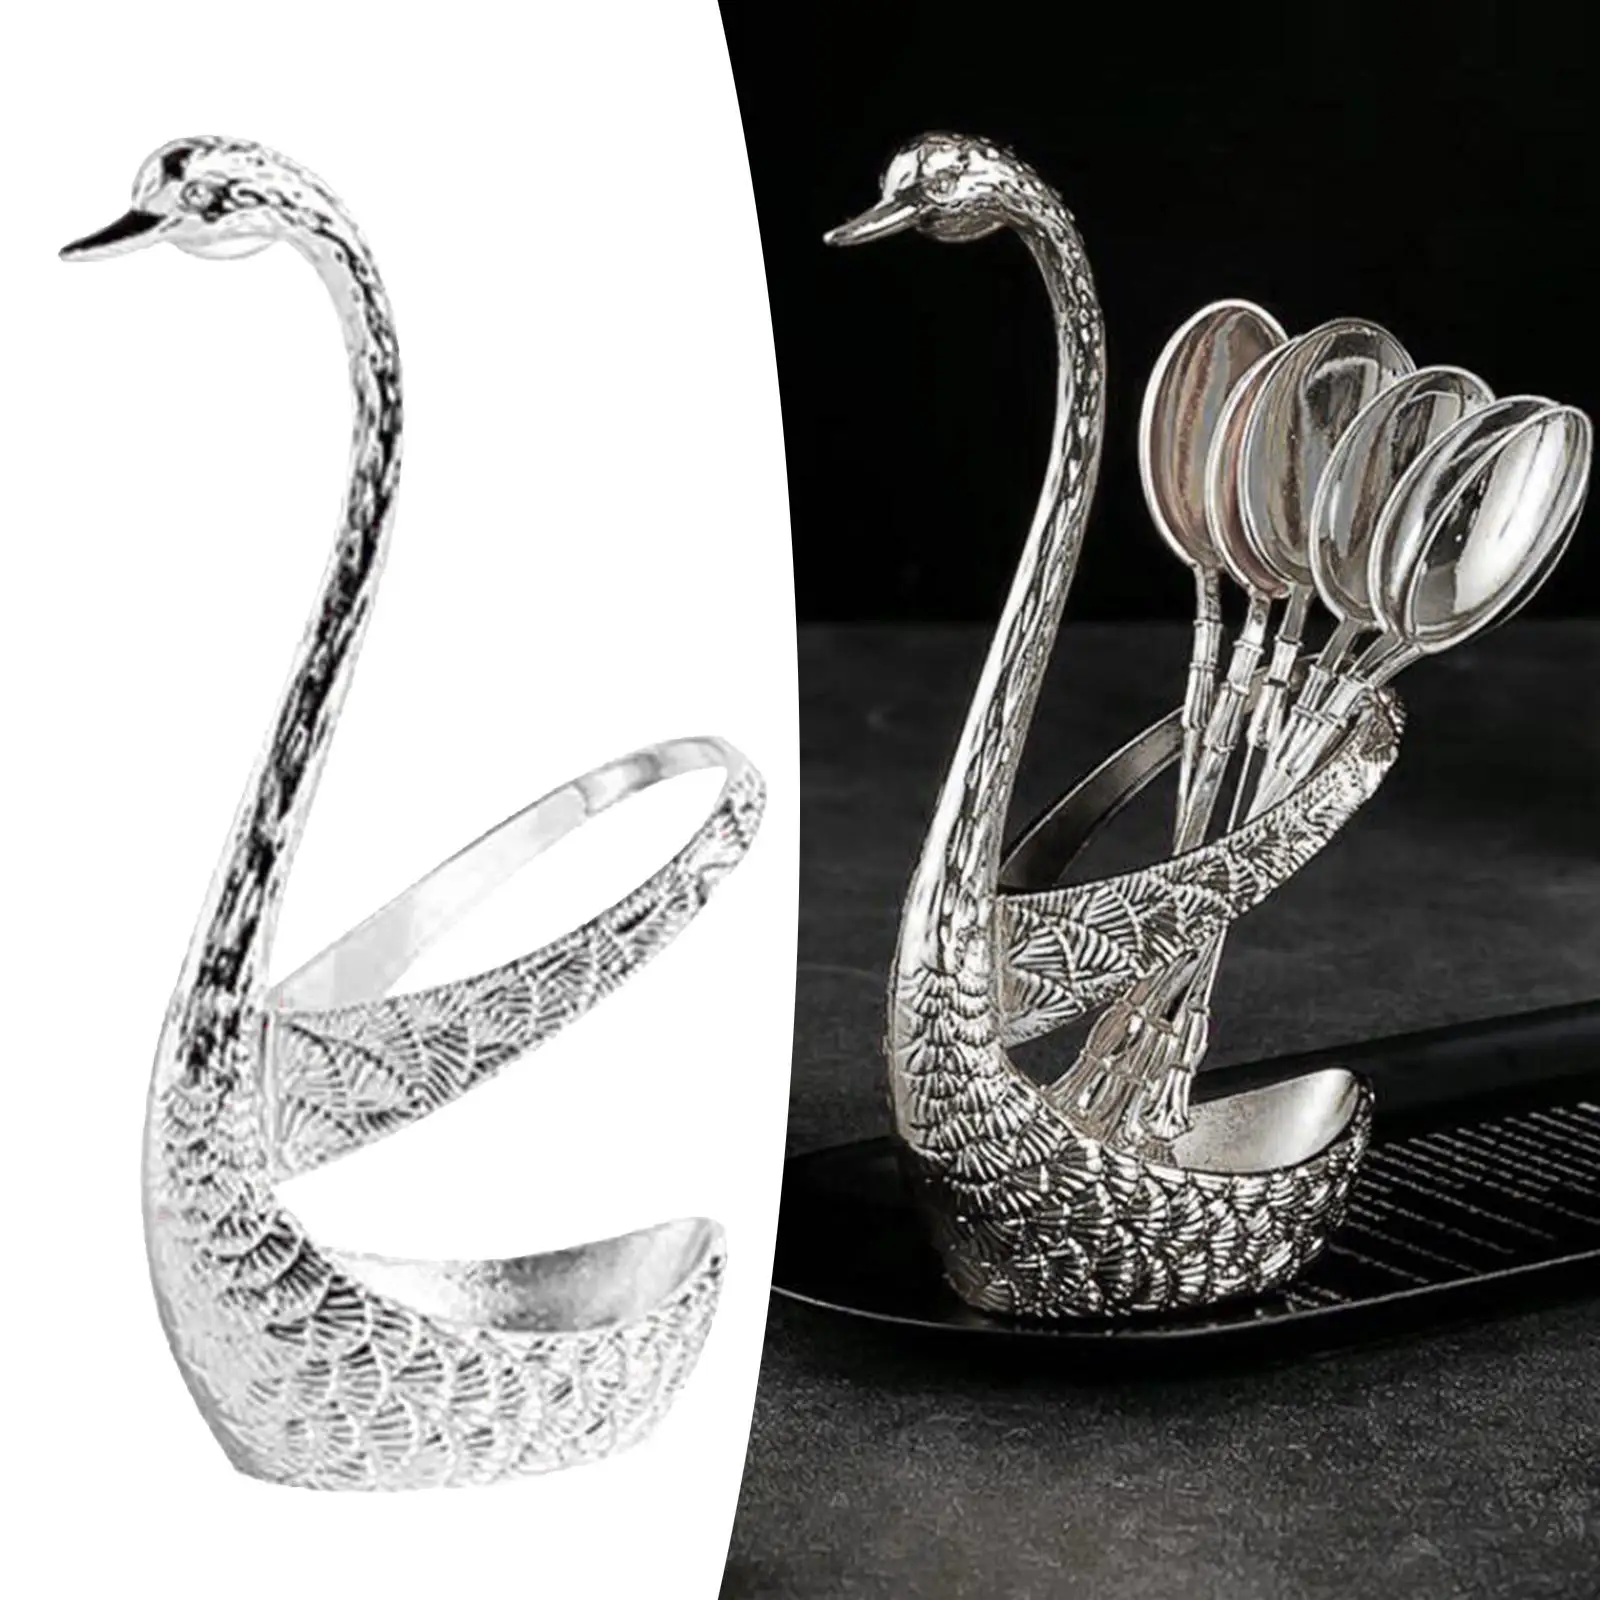 Swan Base Coffee Spoon Holder Stand Organizer for Home Use, Bar, Restaurant